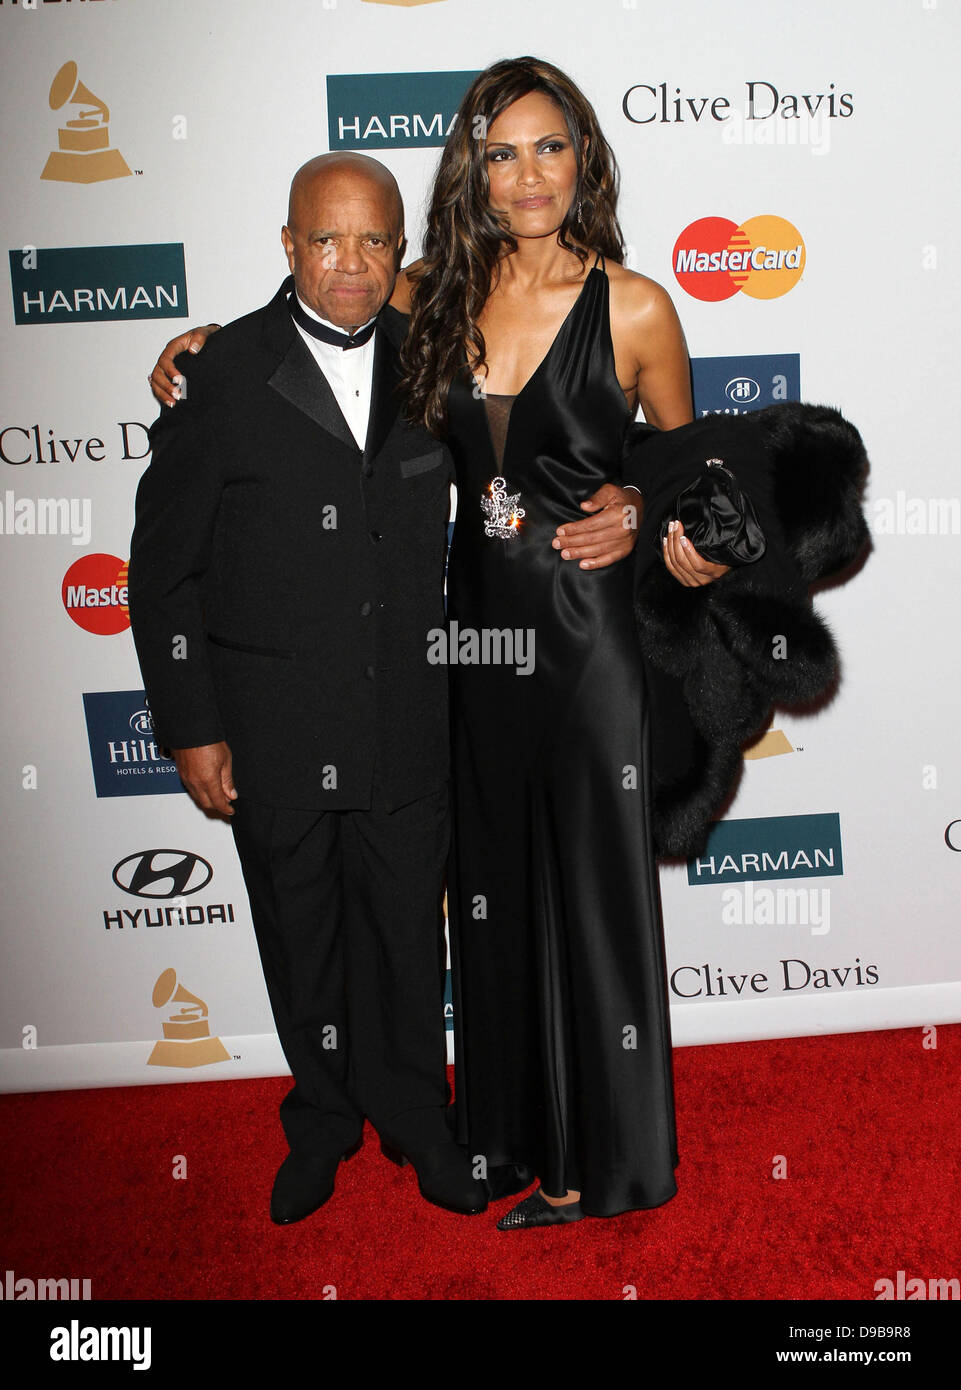 Berry Gordy Jr Clive Davis And The Recording Academy's 2012 Pre-GRAMMY Gala Held at Beverly Hilton Hotel Los Angeles, California - 11.02.12 Stock Photo